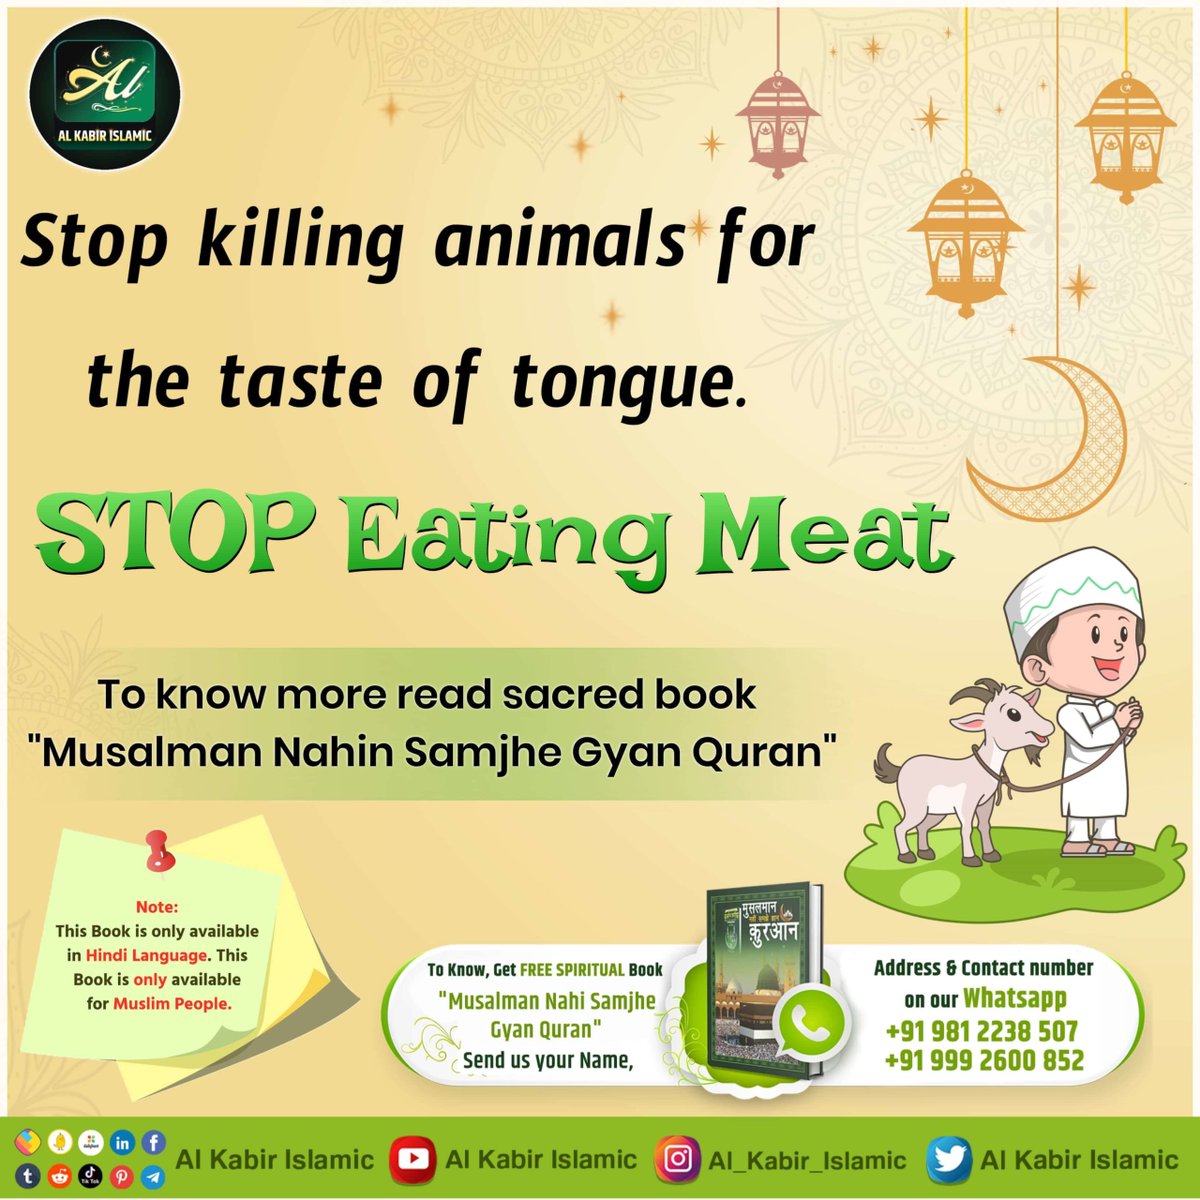 #रहम_करो_मूक_जीवों_पर Eating meat is not the order of Allah. How can Allah be happy with this? To know more, must read the sacred book 'Musalman nahi samjhe gyan Quran'. Sant RampalJi YouTube Channel